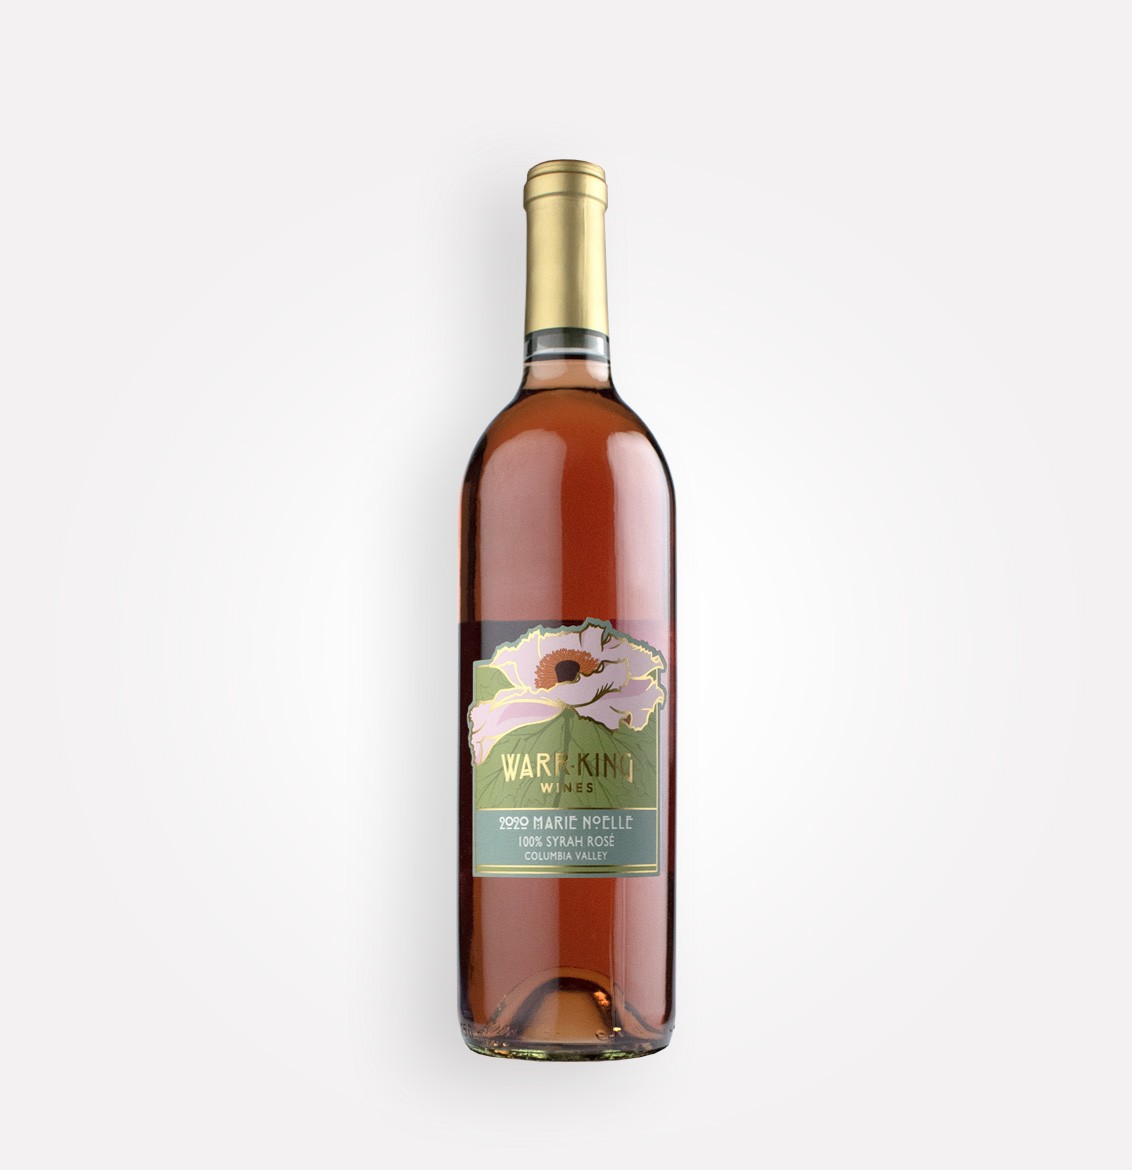 Bottle of Warr-King 2020 Marie Noelle Syrah Rosé wine from Washington's Columbia Valley